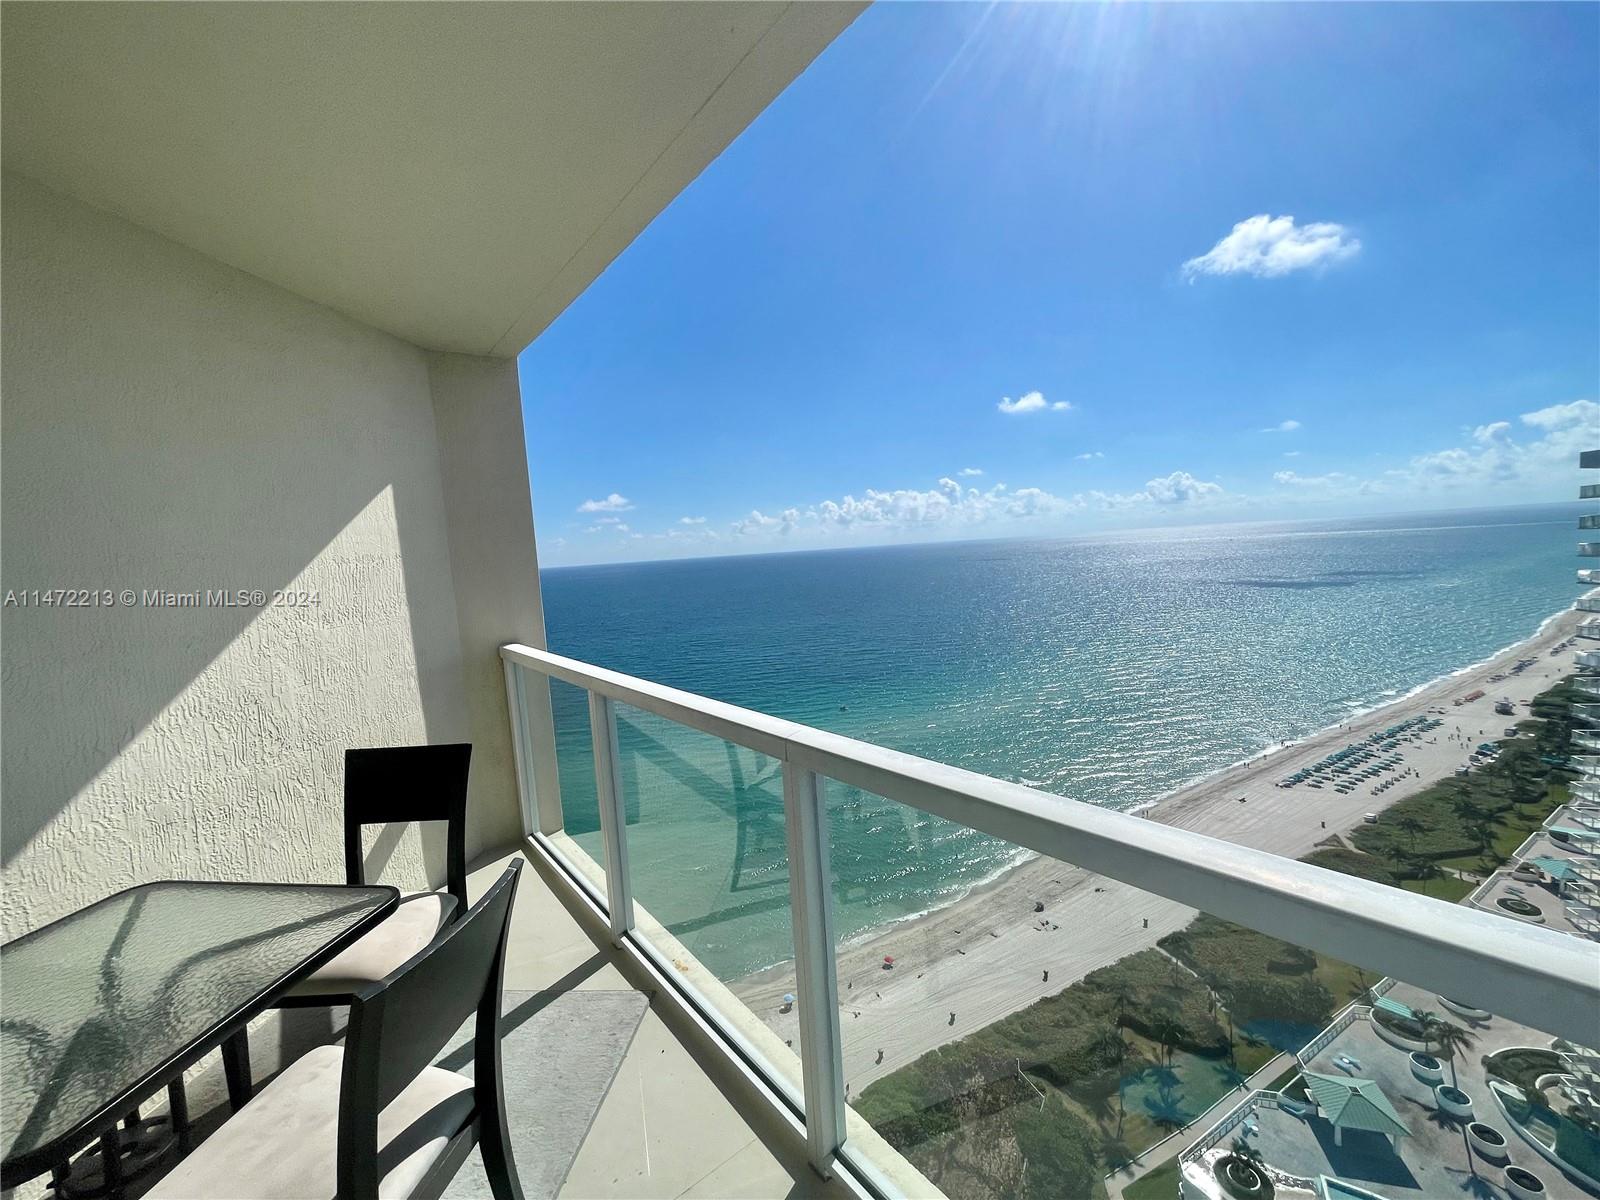 In the heart of Sunny Isles, enjoy resort-style living in large 1 bedroom/1.5 bath unit with desirable south-east view of the ocean, intracoastal and city from 2 terraces. Tastefully decorated, fully furnished & equipped with household items. Resort-style amenities that include beach service, pool, fitness center, jacuzzi, pool cabanas, concierge, valet parking, kids room, 24 hours security. Located next fishing Pier, walking distance to all shops and restaurants. Walk to shopping entertainment and public transportation. Minutes to Aventura Mall, Gulfstream Casino and Bal Harbour Shops. Available from April 2024 until November 2024 for short or long term. Price for short term will vary. STL-02540